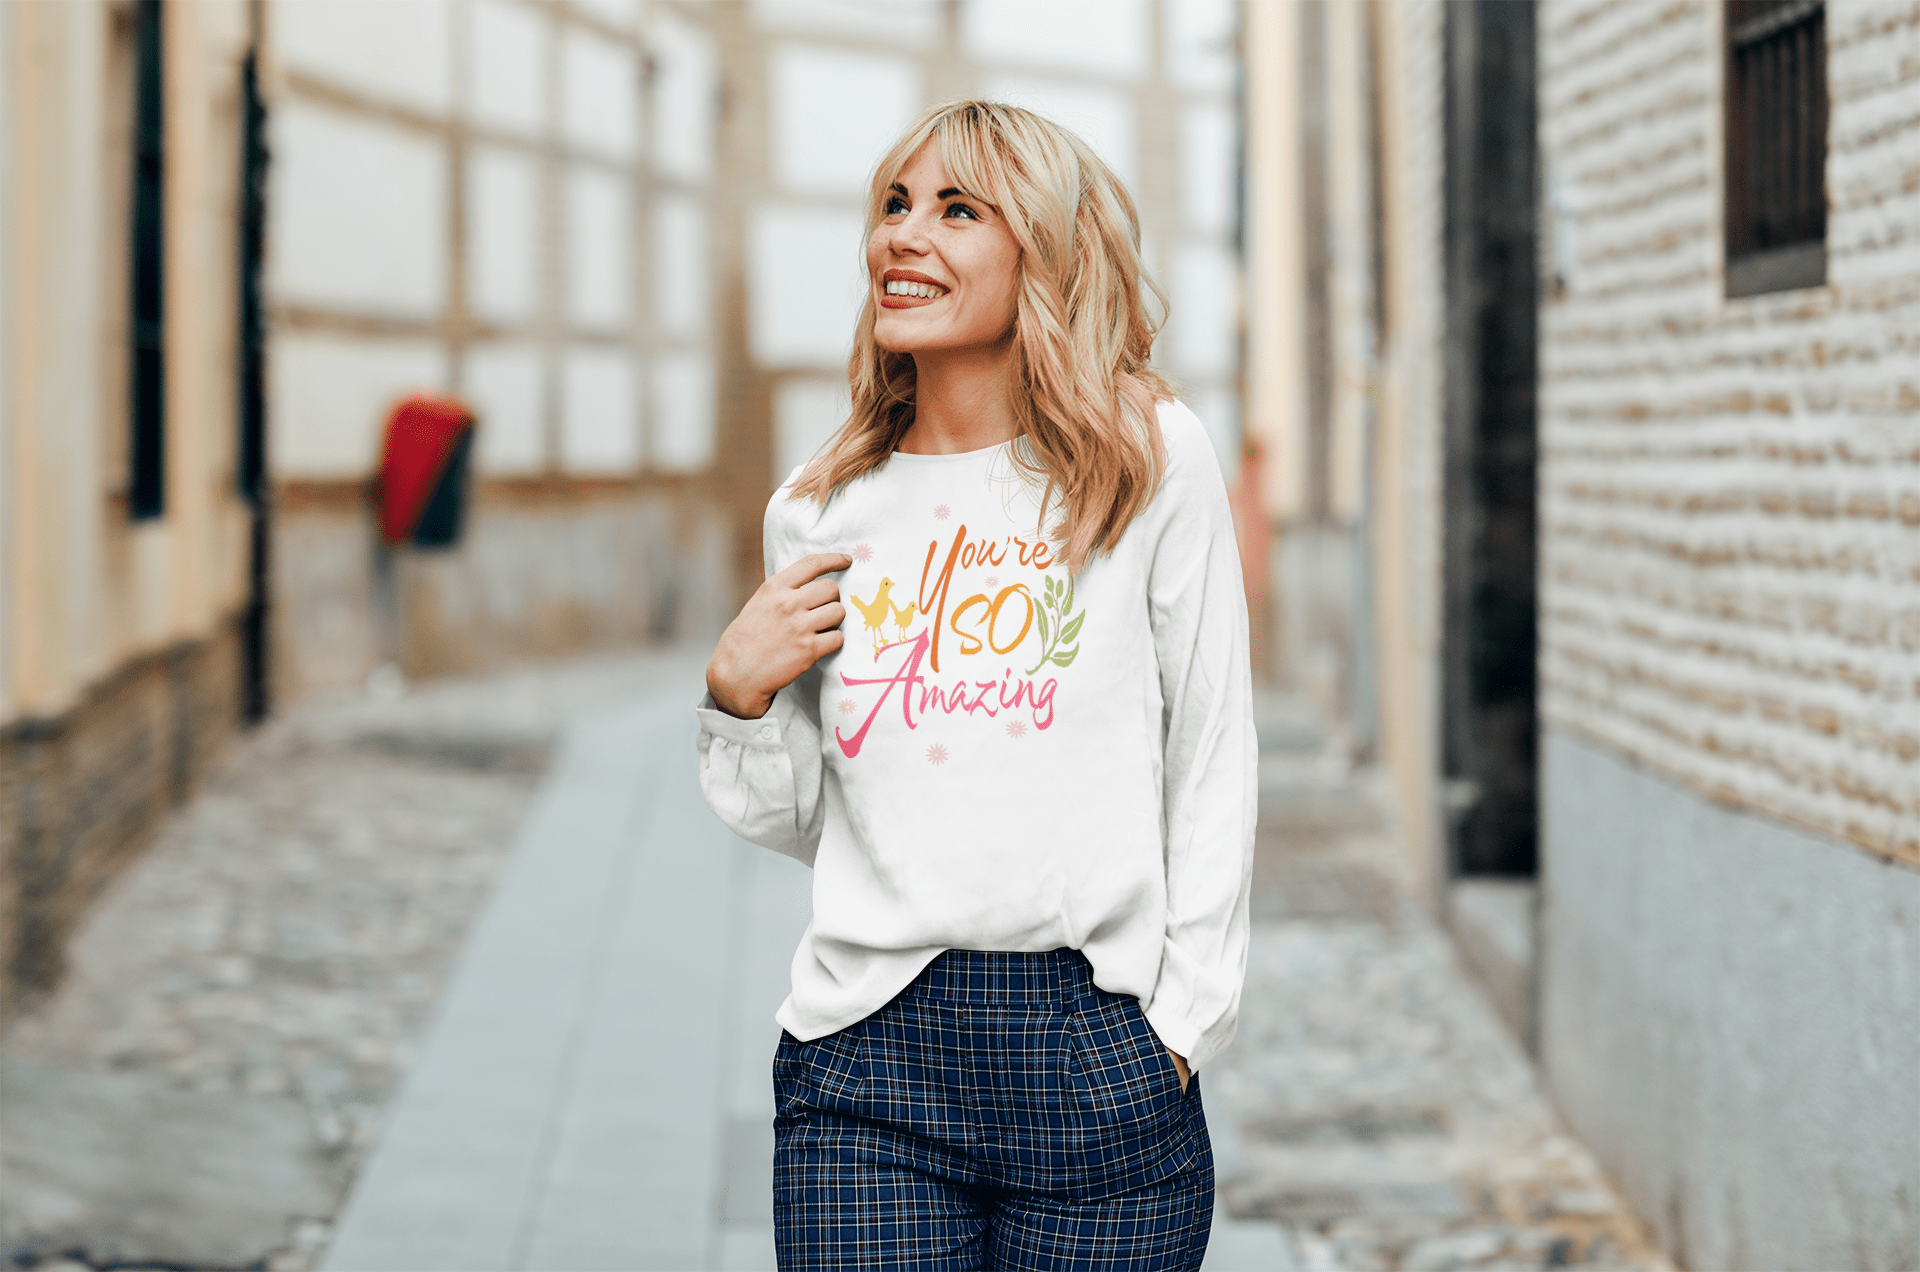 You're So Amazing Inspirational Quote Positive Mindset Lifestyle Unisex Long Sleeve Tee Clothing T-shirts A Moment Of Now Women’s Boutique Clothing Online Lifestyle Store